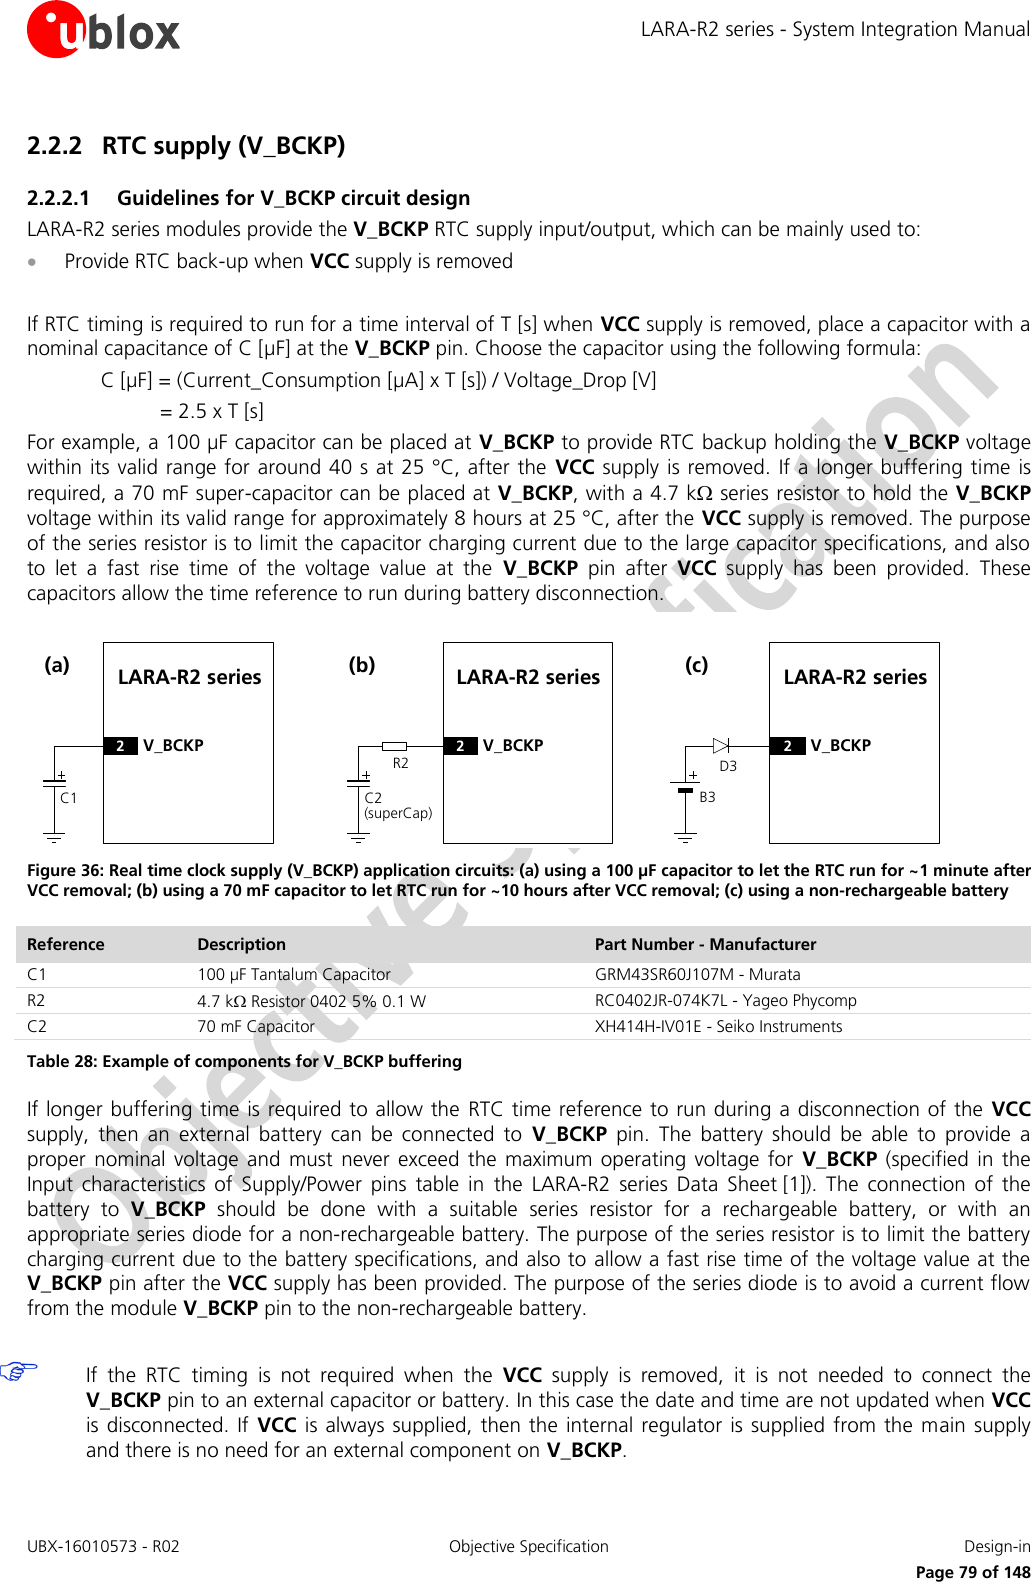 LARA-R2 series - System Integration Manual UBX-16010573 - R02  Objective Specification  Design-in     Page 79 of 148 2.2.2 RTC supply (V_BCKP) 2.2.2.1 Guidelines for V_BCKP circuit design LARA-R2 series modules provide the V_BCKP RTC supply input/output, which can be mainly used to:   Provide RTC back-up when VCC supply is removed  If RTC timing is required to run for a time interval of T [s] when VCC supply is removed, place a capacitor with a nominal capacitance of C [µF] at the V_BCKP pin. Choose the capacitor using the following formula: C [µF] = (Current_Consumption [µA] x T [s]) / Voltage_Drop [V] = 2.5 x T [s]  For example, a 100 µF capacitor can be placed at V_BCKP to provide RTC backup holding the V_BCKP voltage within its valid range for around 40 s at 25 °C, after the  VCC supply is removed.  If a longer buffering time  is required, a 70 mF super-capacitor can be placed at V_BCKP, with a 4.7 k series resistor to hold the V_BCKP voltage within its valid range for approximately 8 hours at 25 °C, after the VCC supply is removed. The purpose of the series resistor is to limit the capacitor charging current due to the large capacitor specifications, and also to  let  a  fast  rise  time  of  the  voltage  value  at  the  V_BCKP  pin  after  VCC  supply  has  been  provided.  These capacitors allow the time reference to run during battery disconnection. LARA-R2 seriesC1(a)2V_BCKPR2LARA-R2 seriesC2(superCap)(b)2V_BCKPD3LARA-R2 seriesB3(c)2V_BCKP Figure 36: Real time clock supply (V_BCKP) application circuits: (a) using a 100 µF capacitor to let the RTC run for ~1 minute after VCC removal; (b) using a 70 mF capacitor to let RTC run for ~10 hours after VCC removal; (c) using a non-rechargeable battery Reference Description Part Number - Manufacturer C1 100 µF Tantalum Capacitor GRM43SR60J107M - Murata R2 4.7 k Resistor 0402 5% 0.1 W  RC0402JR-074K7L - Yageo Phycomp C2 70 mF Capacitor  XH414H-IV01E - Seiko Instruments Table 28: Example of components for V_BCKP buffering If longer buffering time is required to allow the  RTC time reference to run during a disconnection of the  VCC supply,  then  an  external  battery  can  be  connected  to  V_BCKP  pin.  The  battery  should  be  able  to  provide  a proper  nominal  voltage  and  must  never exceed  the  maximum  operating  voltage  for  V_BCKP (specified  in the Input  characteristics  of  Supply/Power  pins  table  in  the  LARA-R2  series Data  Sheet [1]).  The  connection  of  the battery  to  V_BCKP  should  be  done  with  a  suitable  series  resistor  for  a  rechargeable  battery,  or  with  an appropriate series diode for a non-rechargeable battery. The purpose of the series resistor is to limit the battery charging current due to the battery specifications, and also to  allow a fast rise time of the voltage value at the V_BCKP pin after the VCC supply has been provided. The purpose of the series diode is to avoid a current flow from the module V_BCKP pin to the non-rechargeable battery.   If  the  RTC  timing  is  not  required  when  the  VCC  supply  is  removed,  it  is  not  needed  to  connect  the V_BCKP pin to an external capacitor or battery. In this case the date and time are not updated when VCC is disconnected. If  VCC is always supplied, then the  internal  regulator  is  supplied from the  main supply and there is no need for an external component on V_BCKP. 